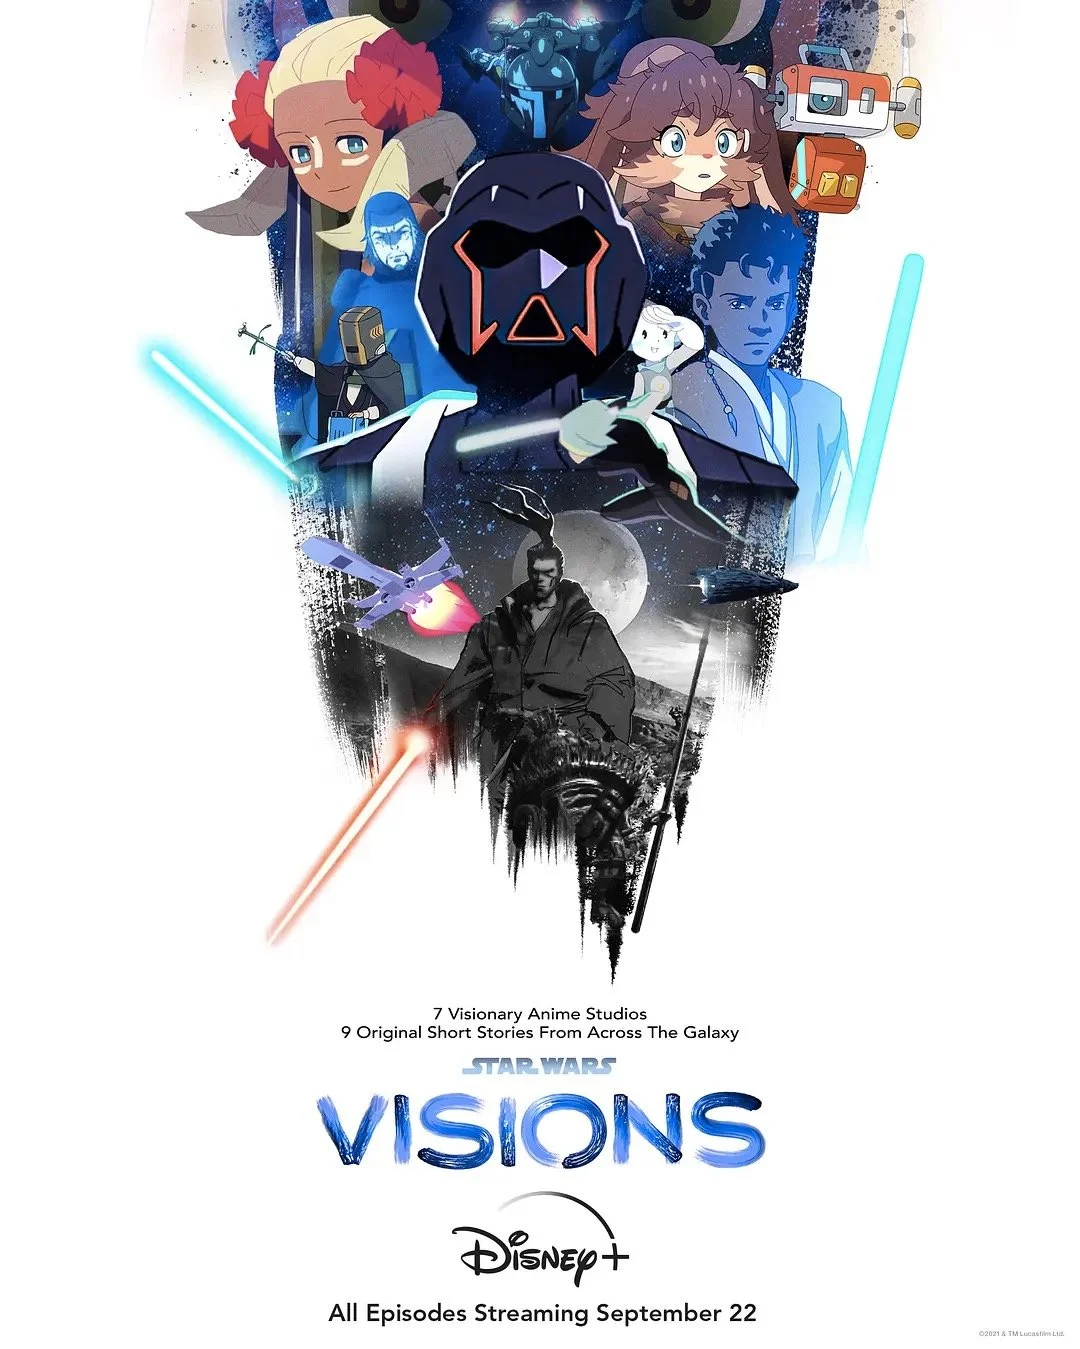 "Star Wars: Visions Season 2‎" officially announced that it will be launched on Disney+ in the spring of 2023, and exposed the red logo of this season!